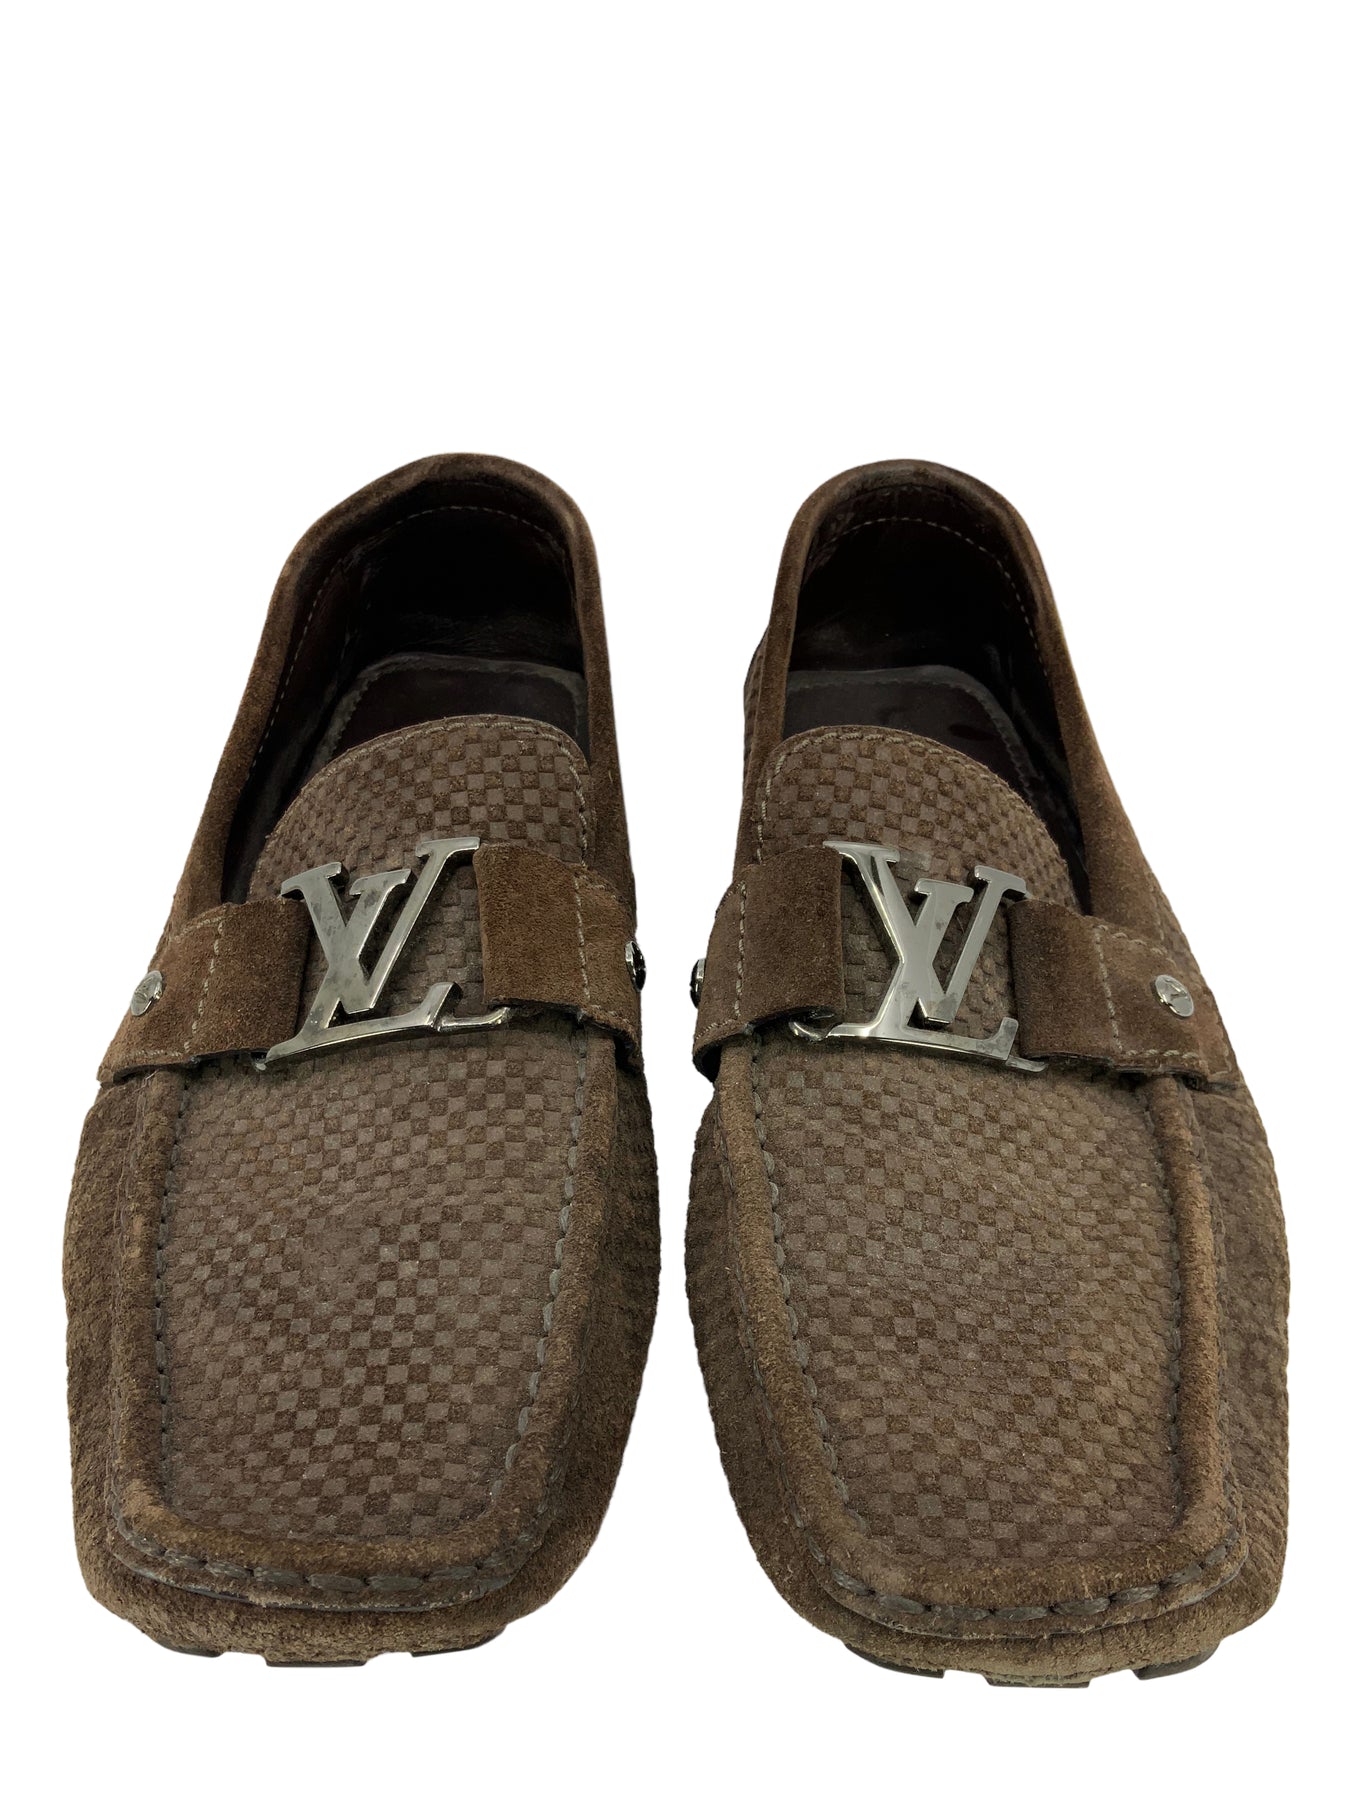 Louis Vuitton Monte Carlo Suede Men's Driving Loafers Size 8